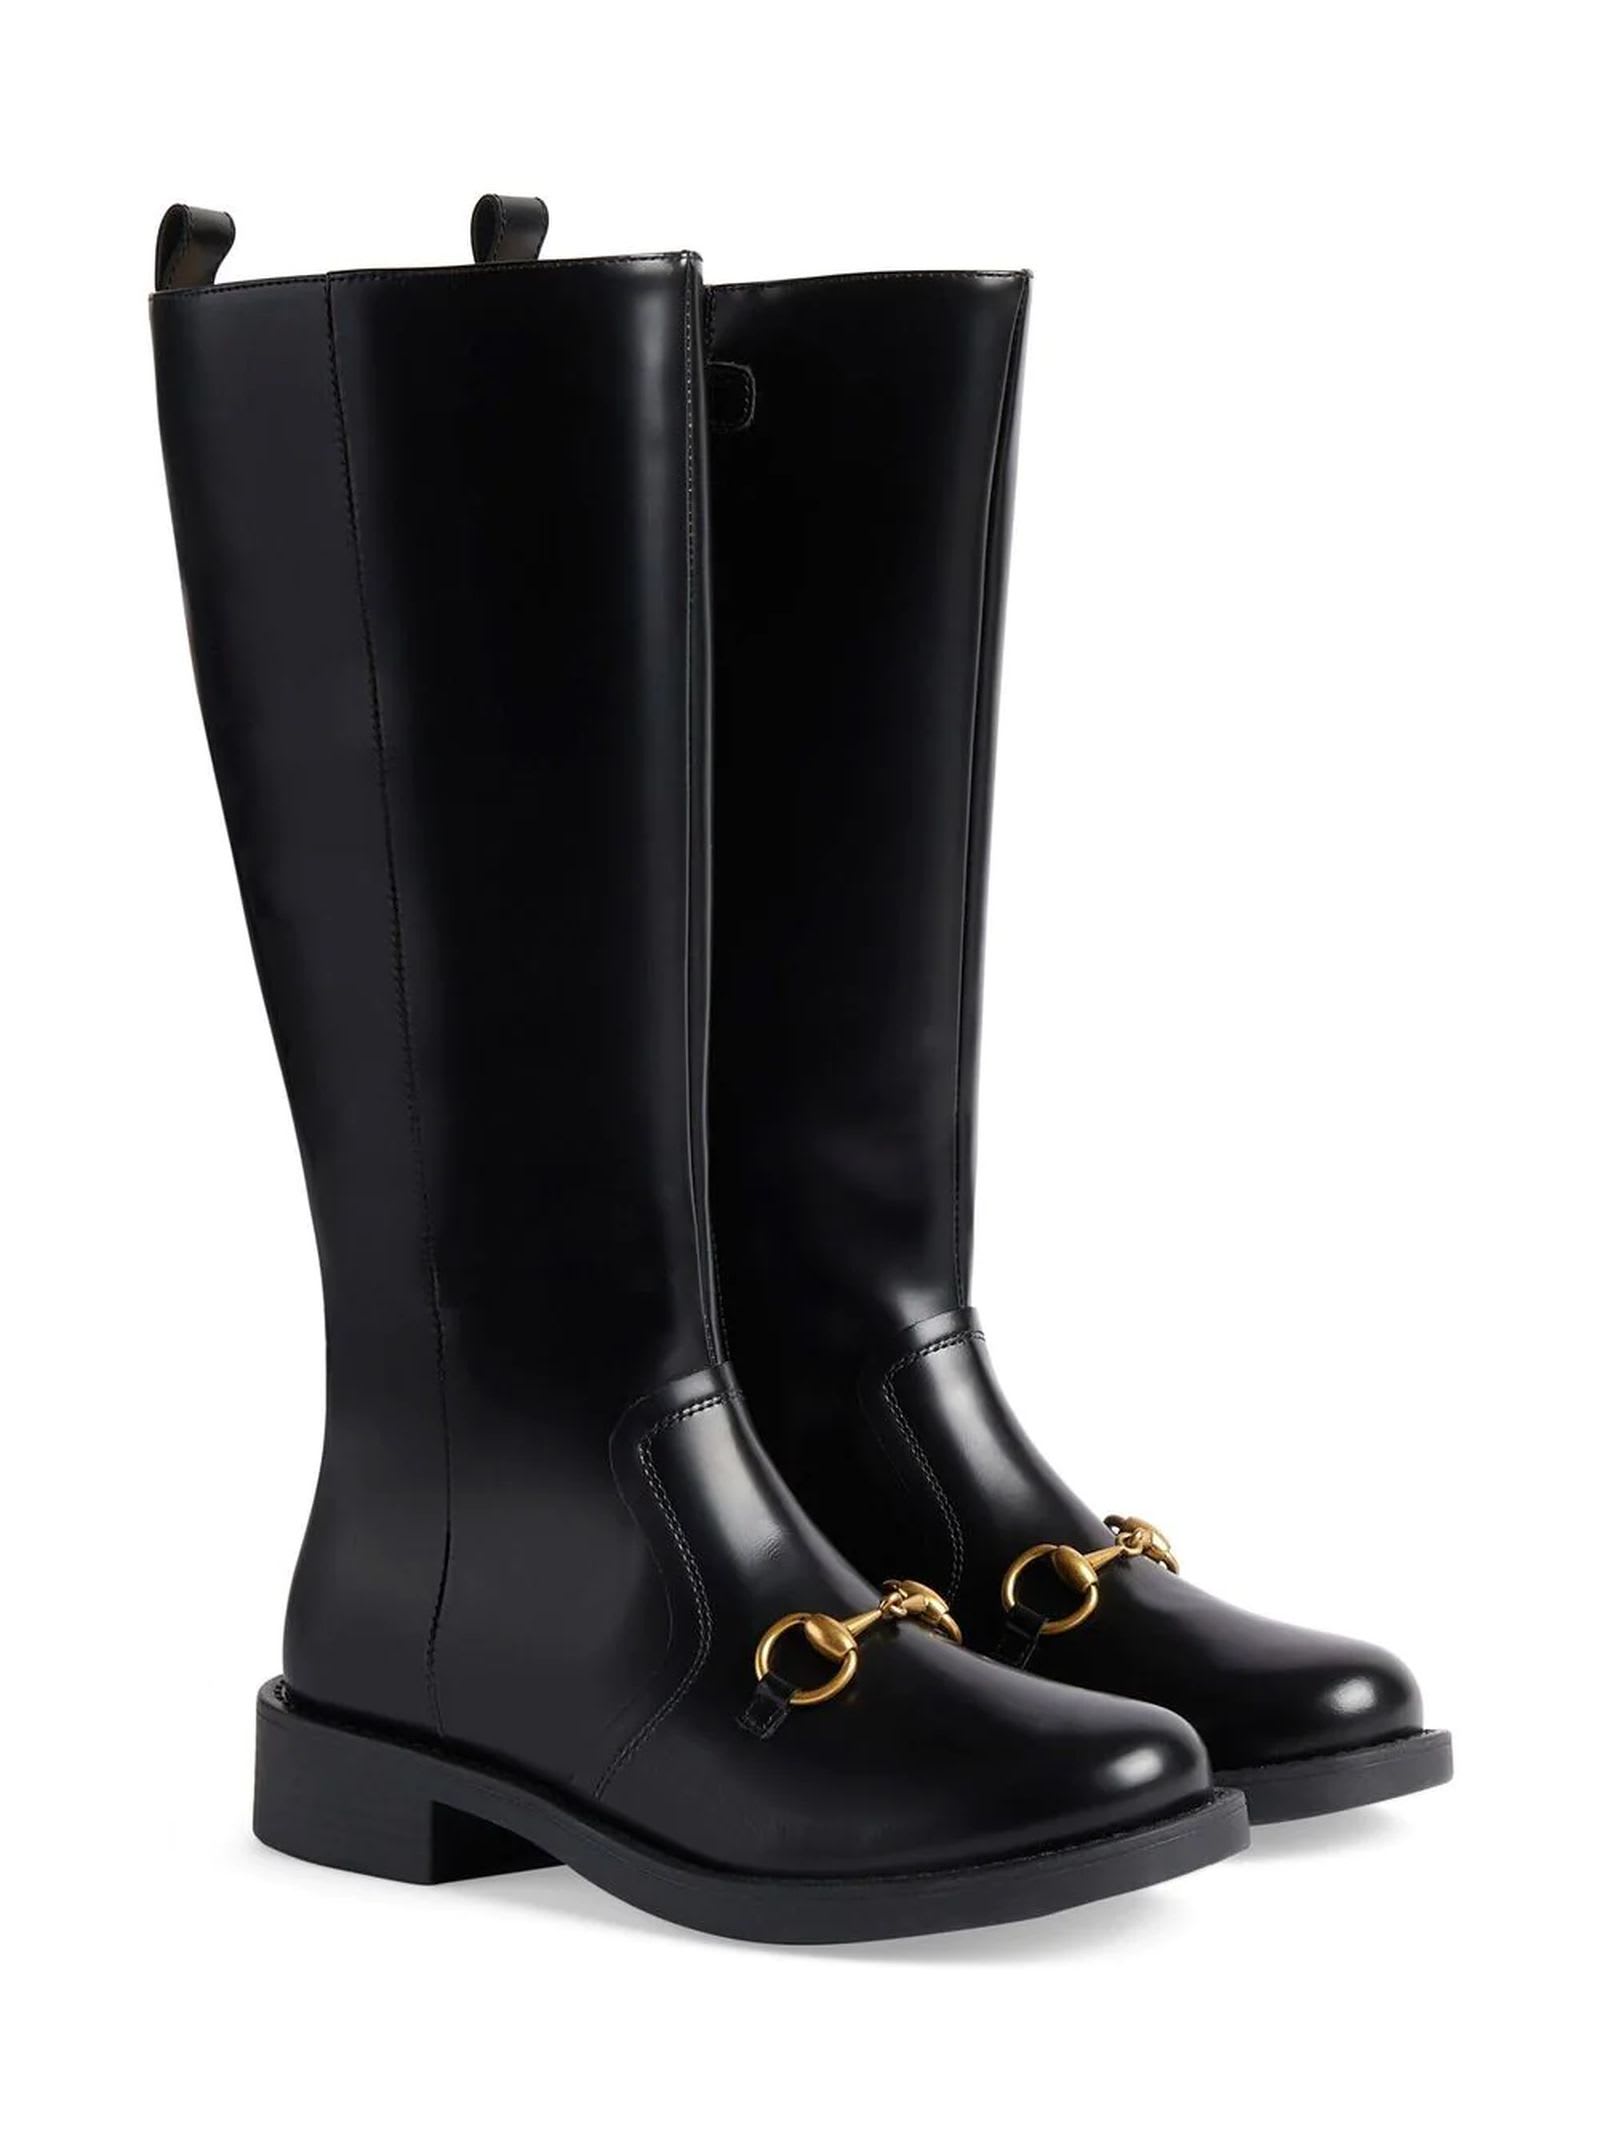 Gucci Black Leather Boots